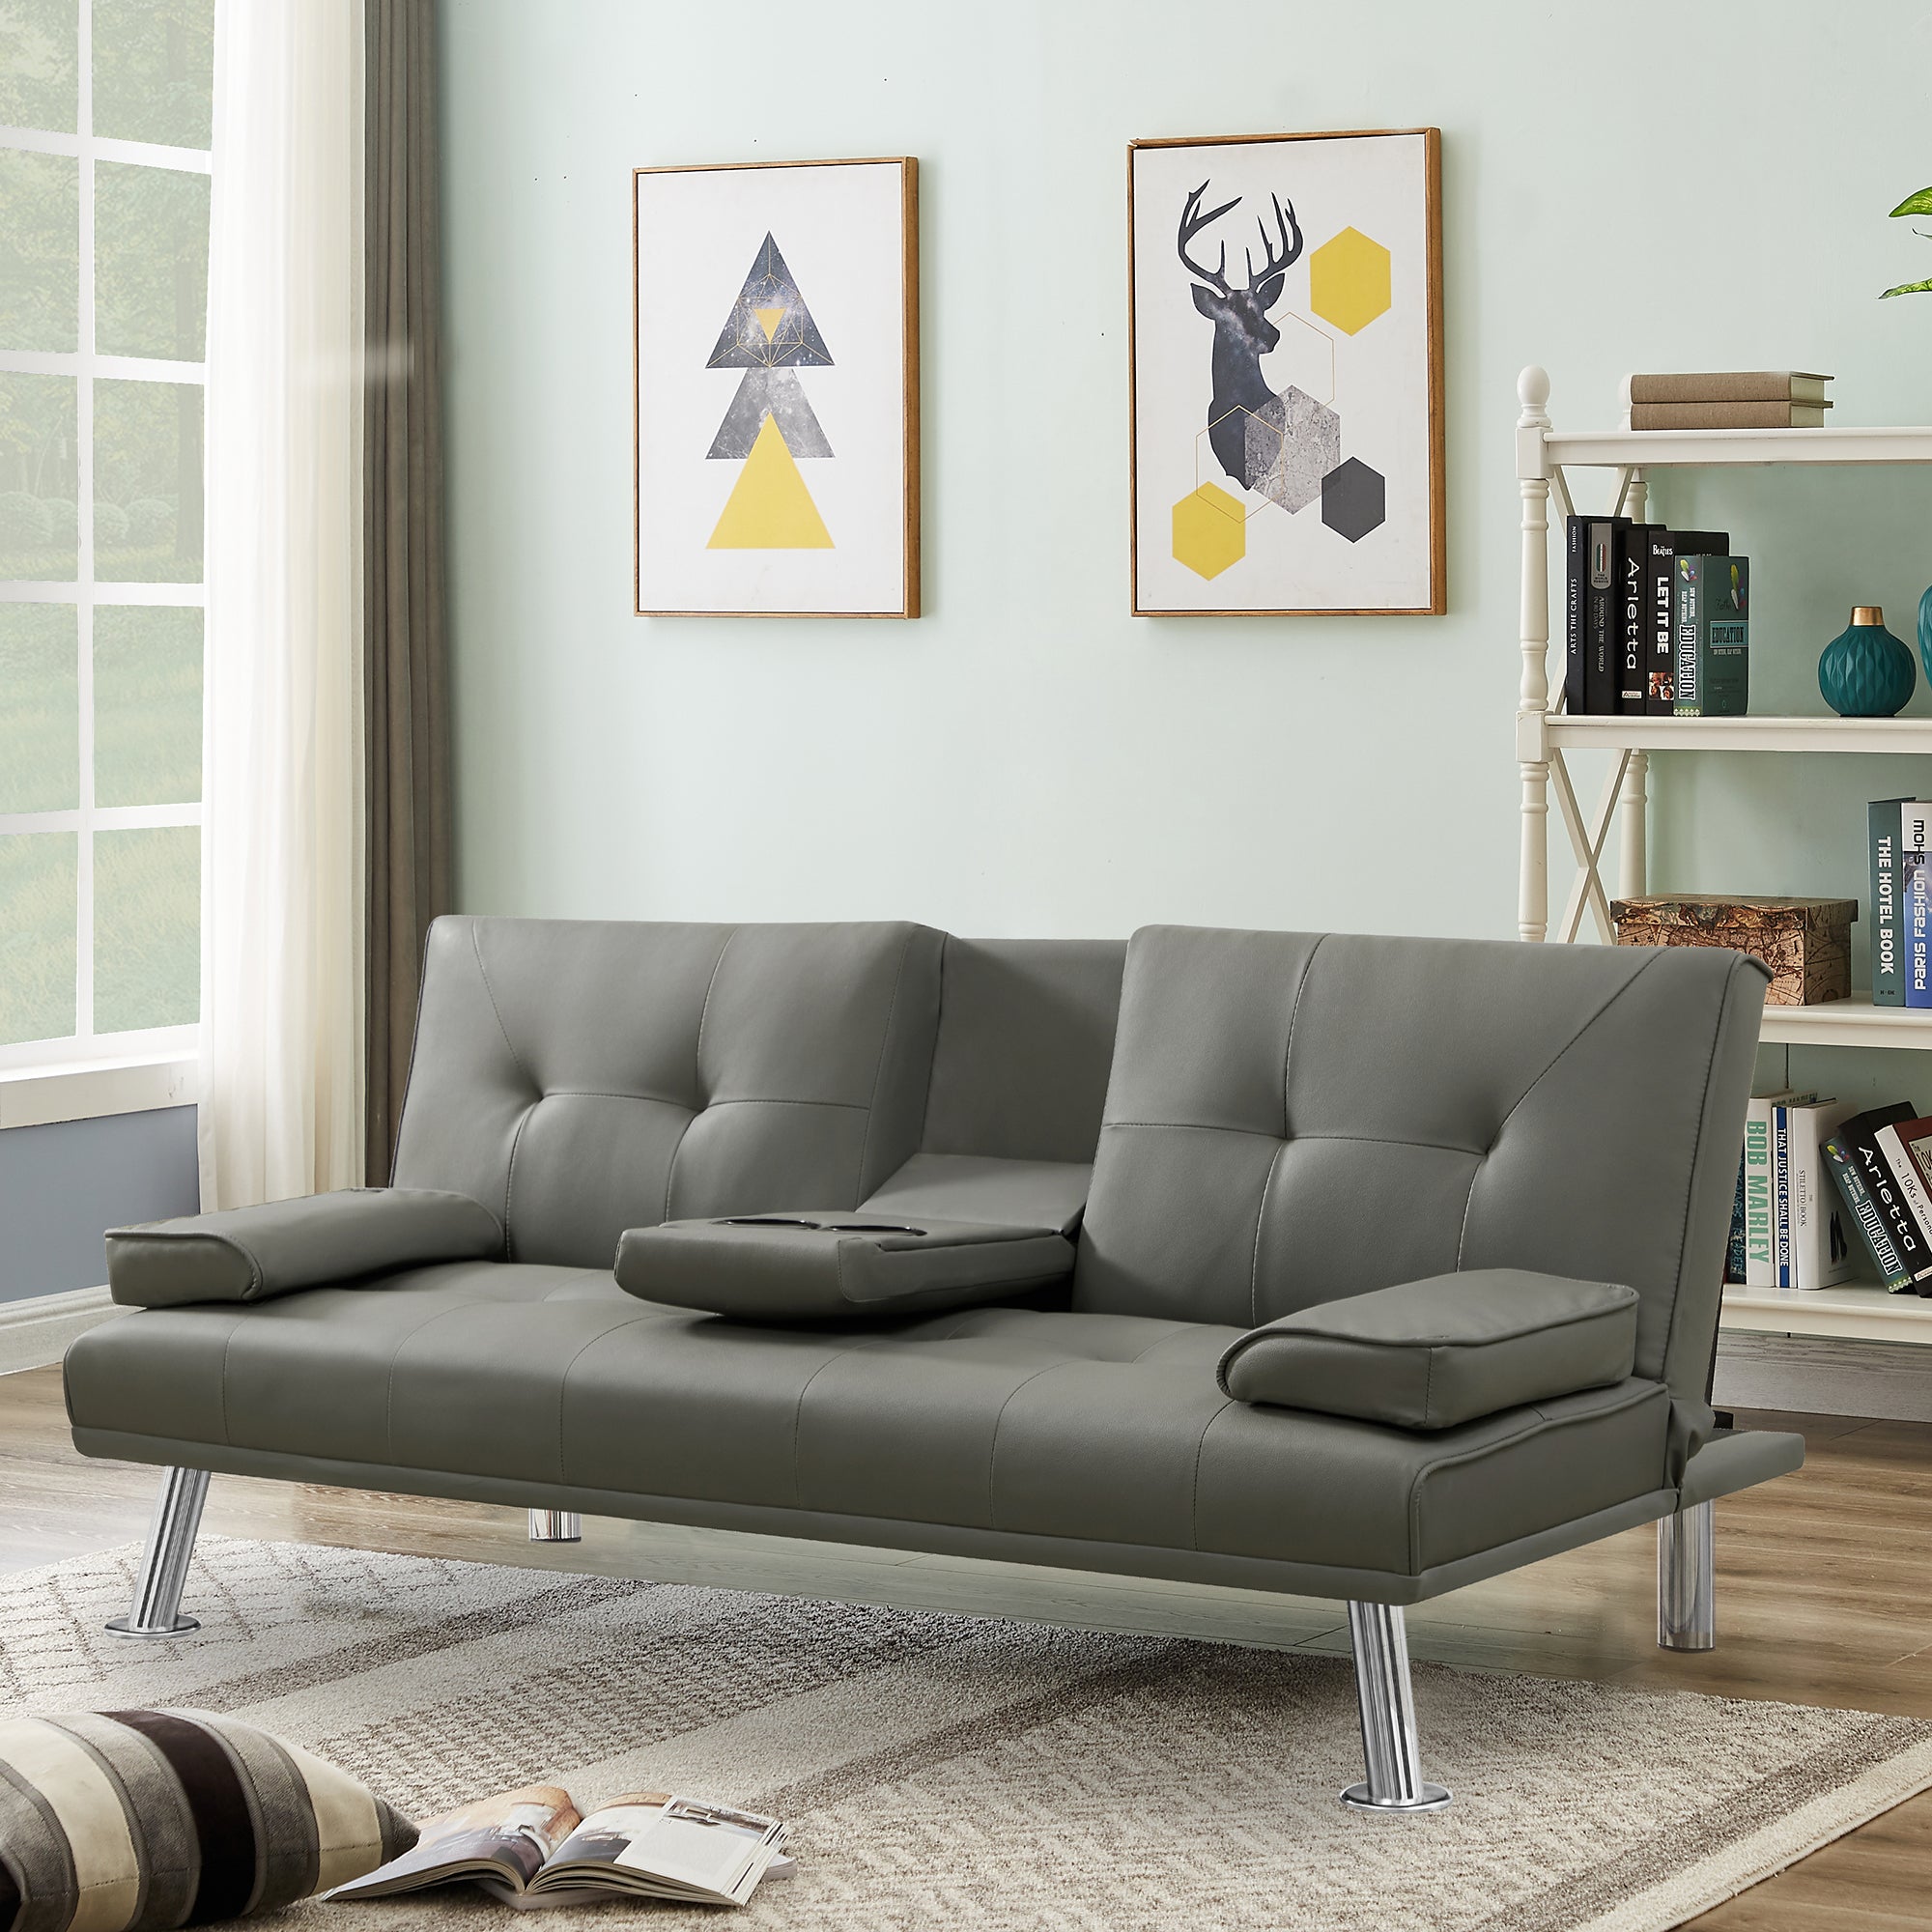 GREY PU SOFA BED WITH CUP HOLDER grey-wood-tufted back-armless-foam-pu-2 seat